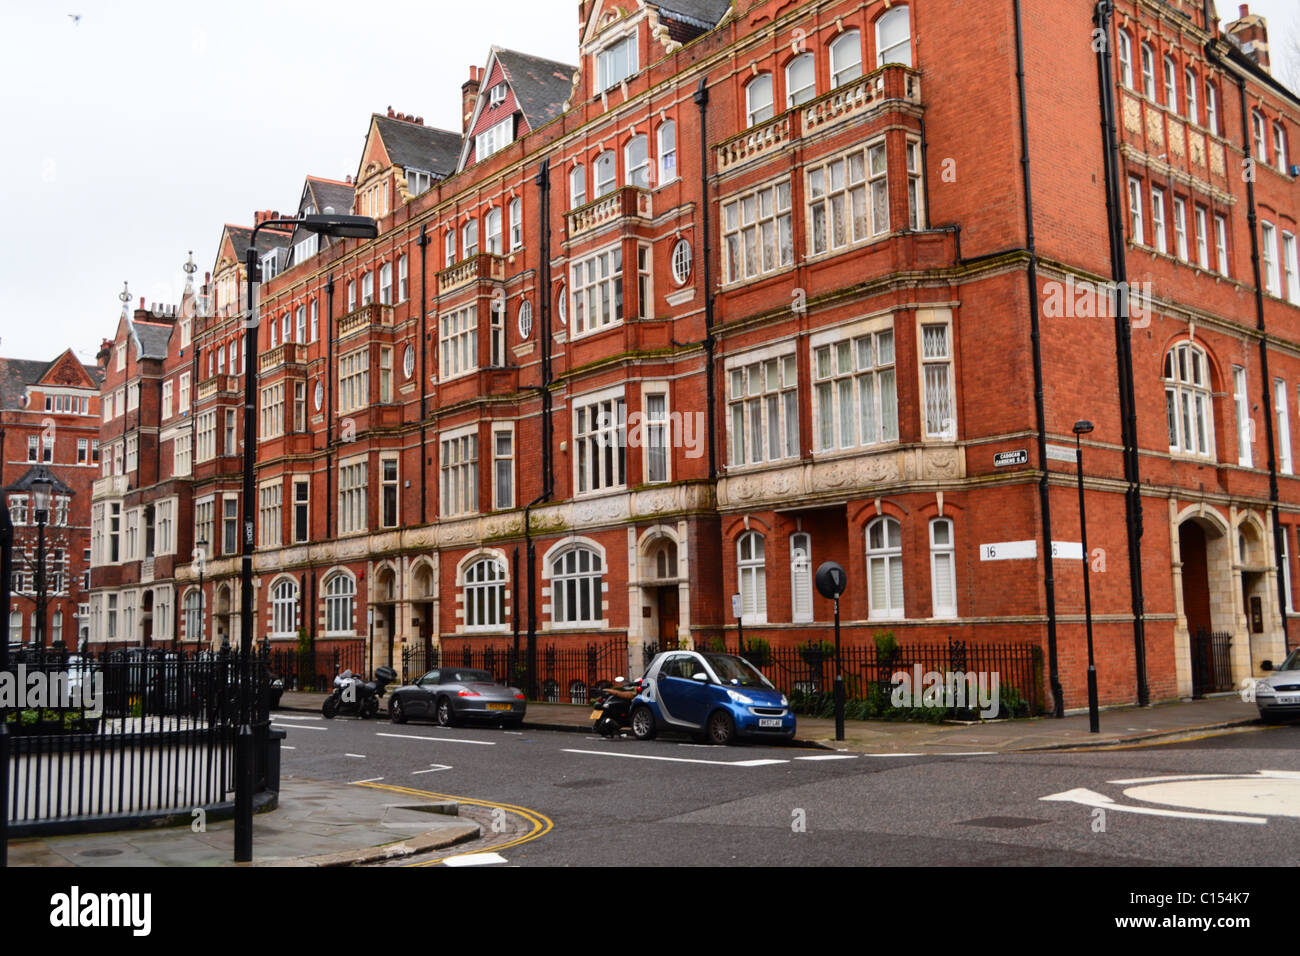 Homes of the Wealthy: Red Brick Houses near Cadogan Square, Knightsbridge Chelsea Area, London, United Kingdom. Stock Photo